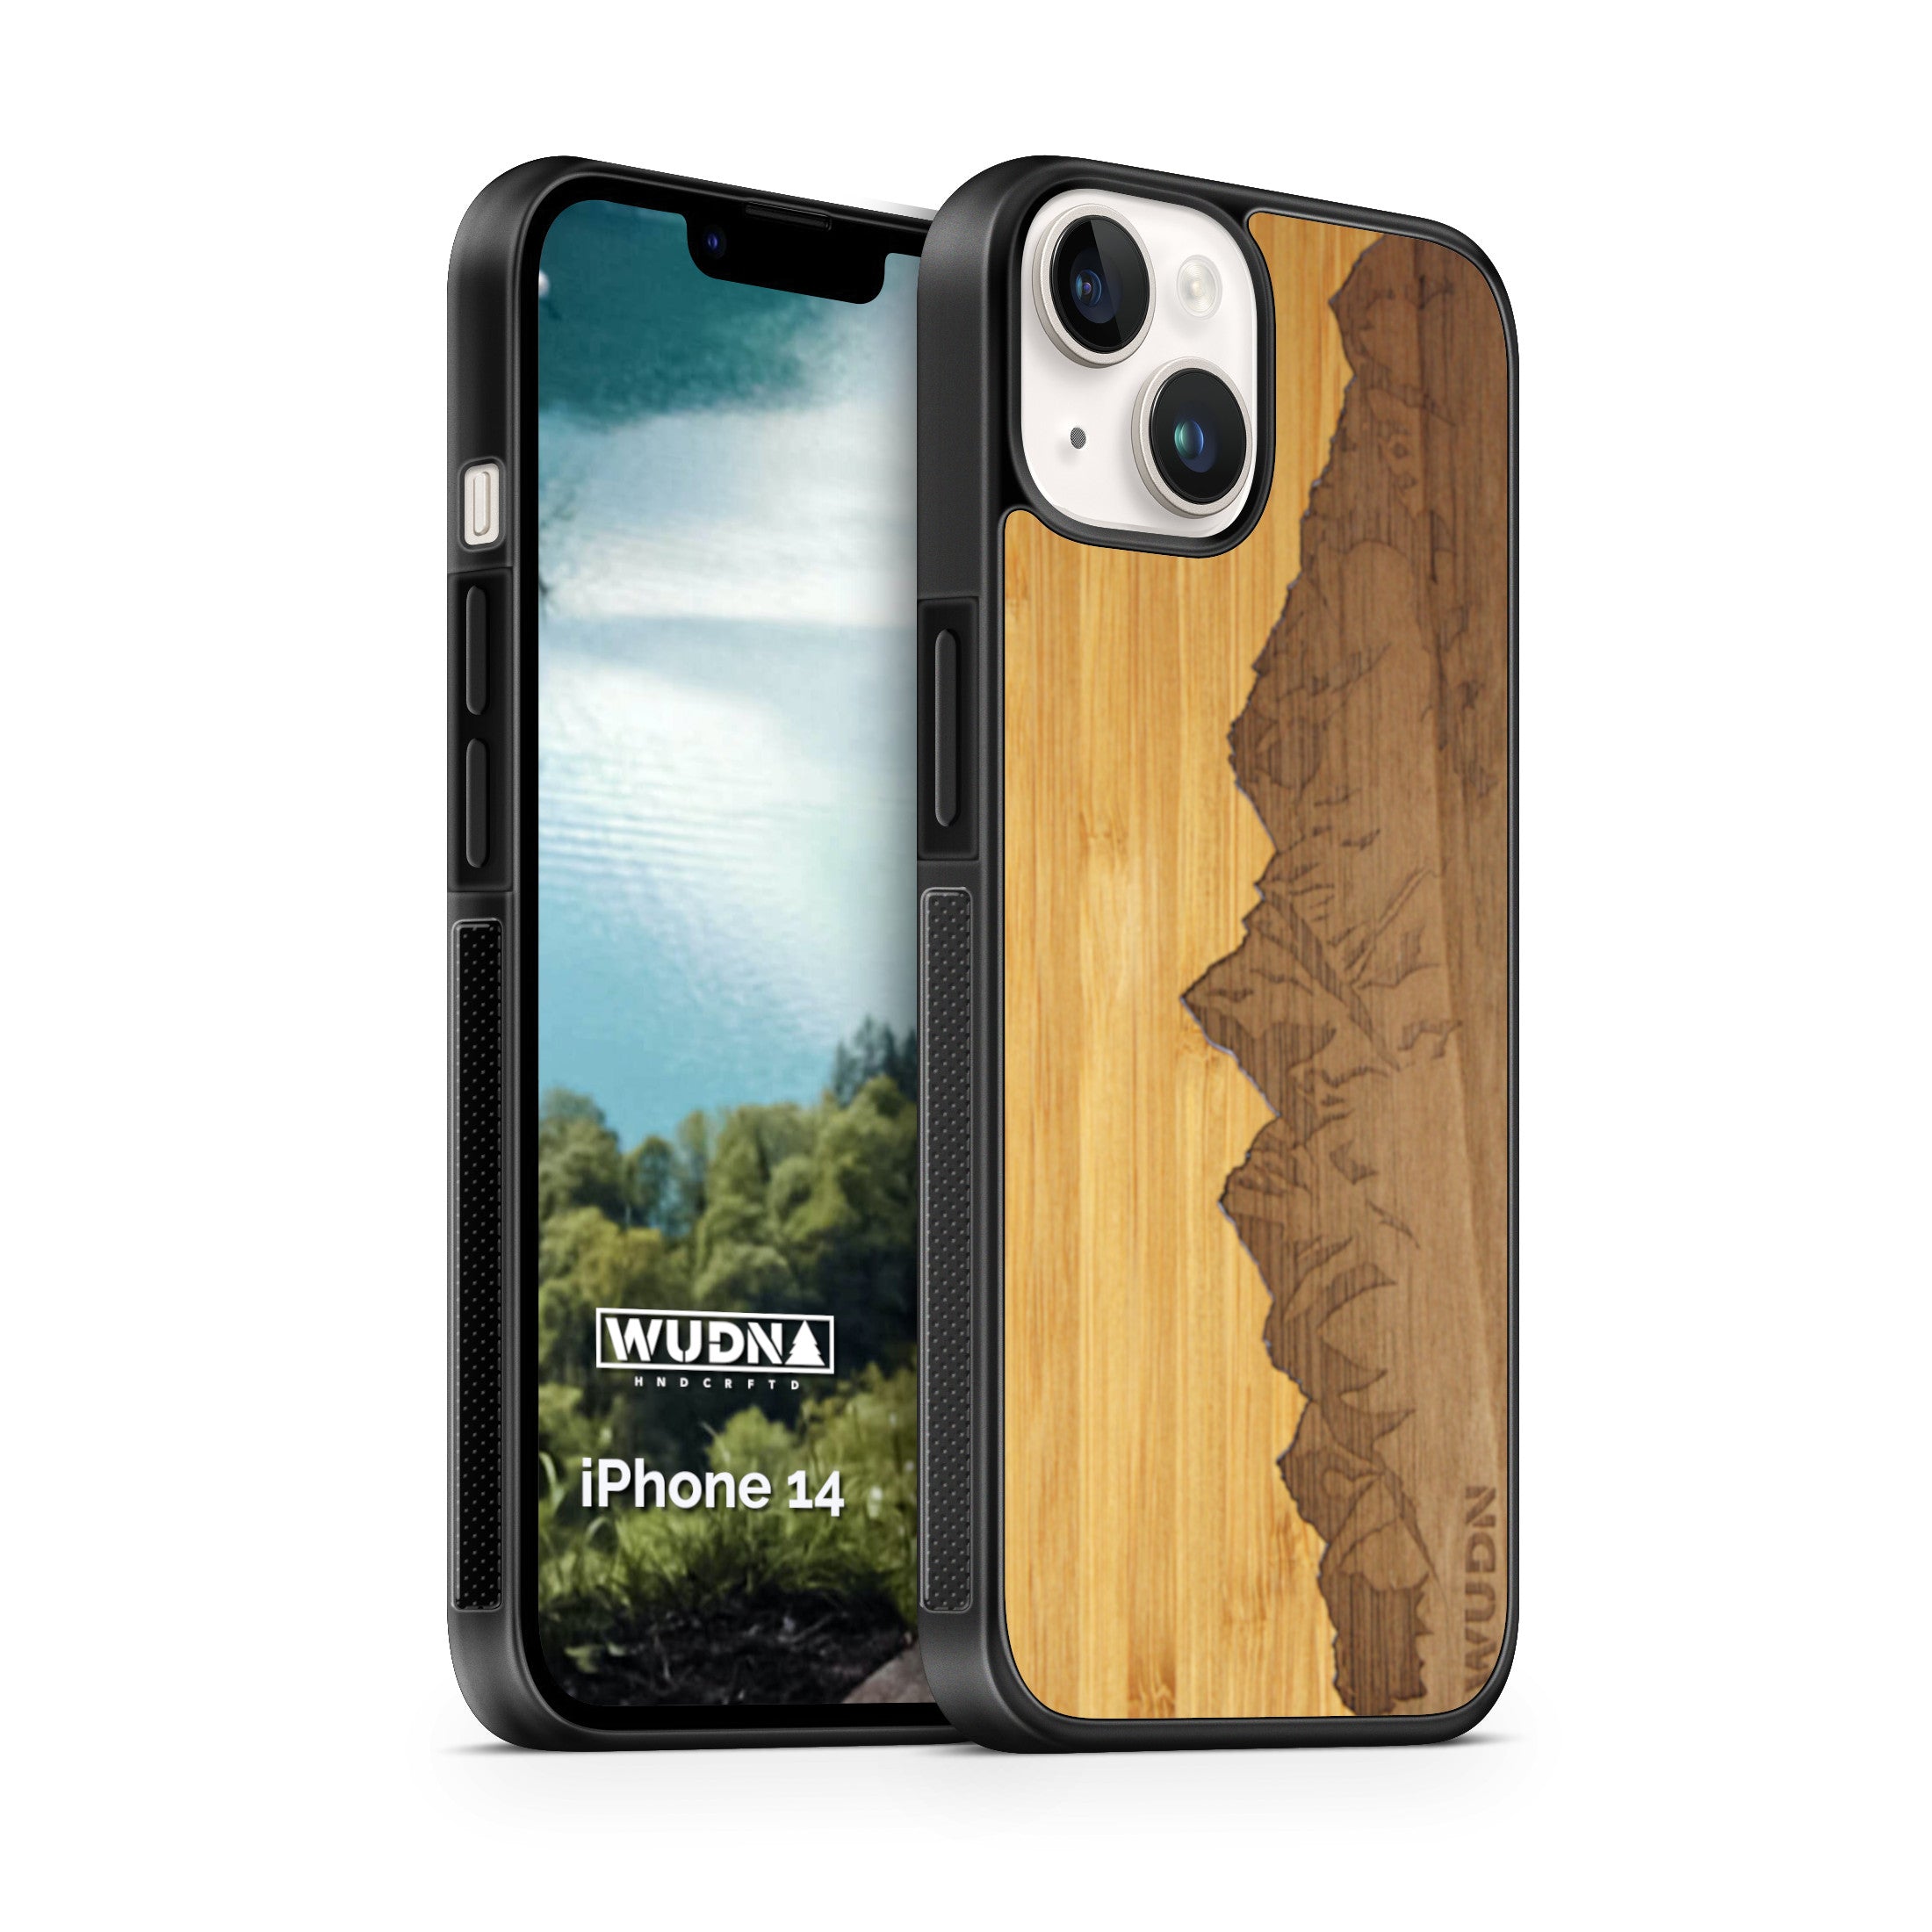 Lodge  Wayfinder Series Handmade and UV Printed Cotton Canvas iPhone X Case  by Keyway